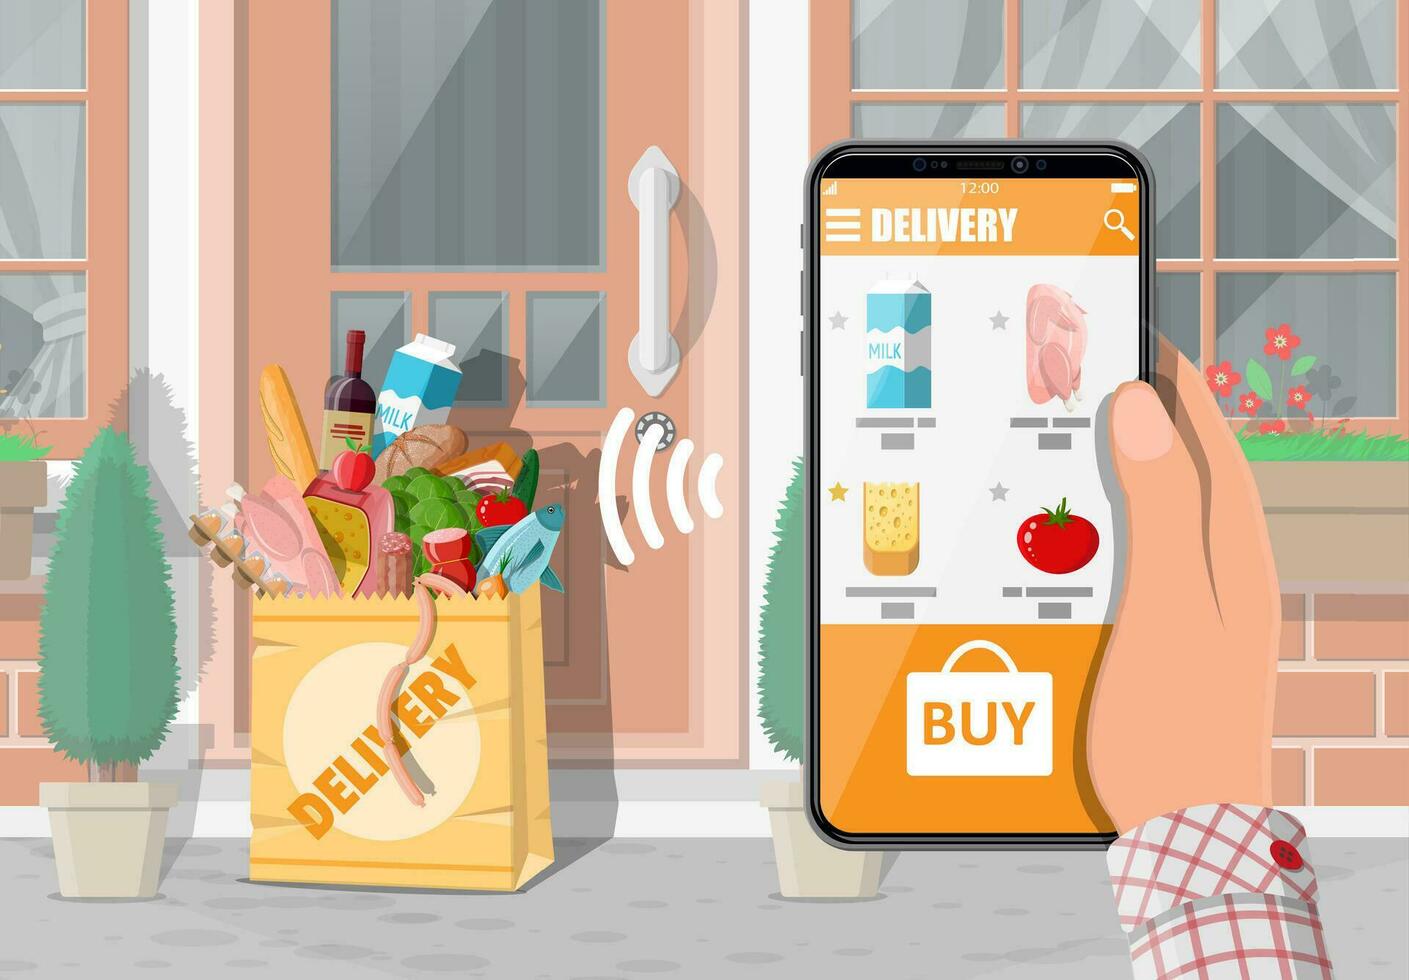 Paper bag of groceries left at door of living house. Food delivery from shop, cafe, restaurant. Grocery products express delivery. Bread, meat, milk, fruit vegetable, drinks. Flat vector illustration